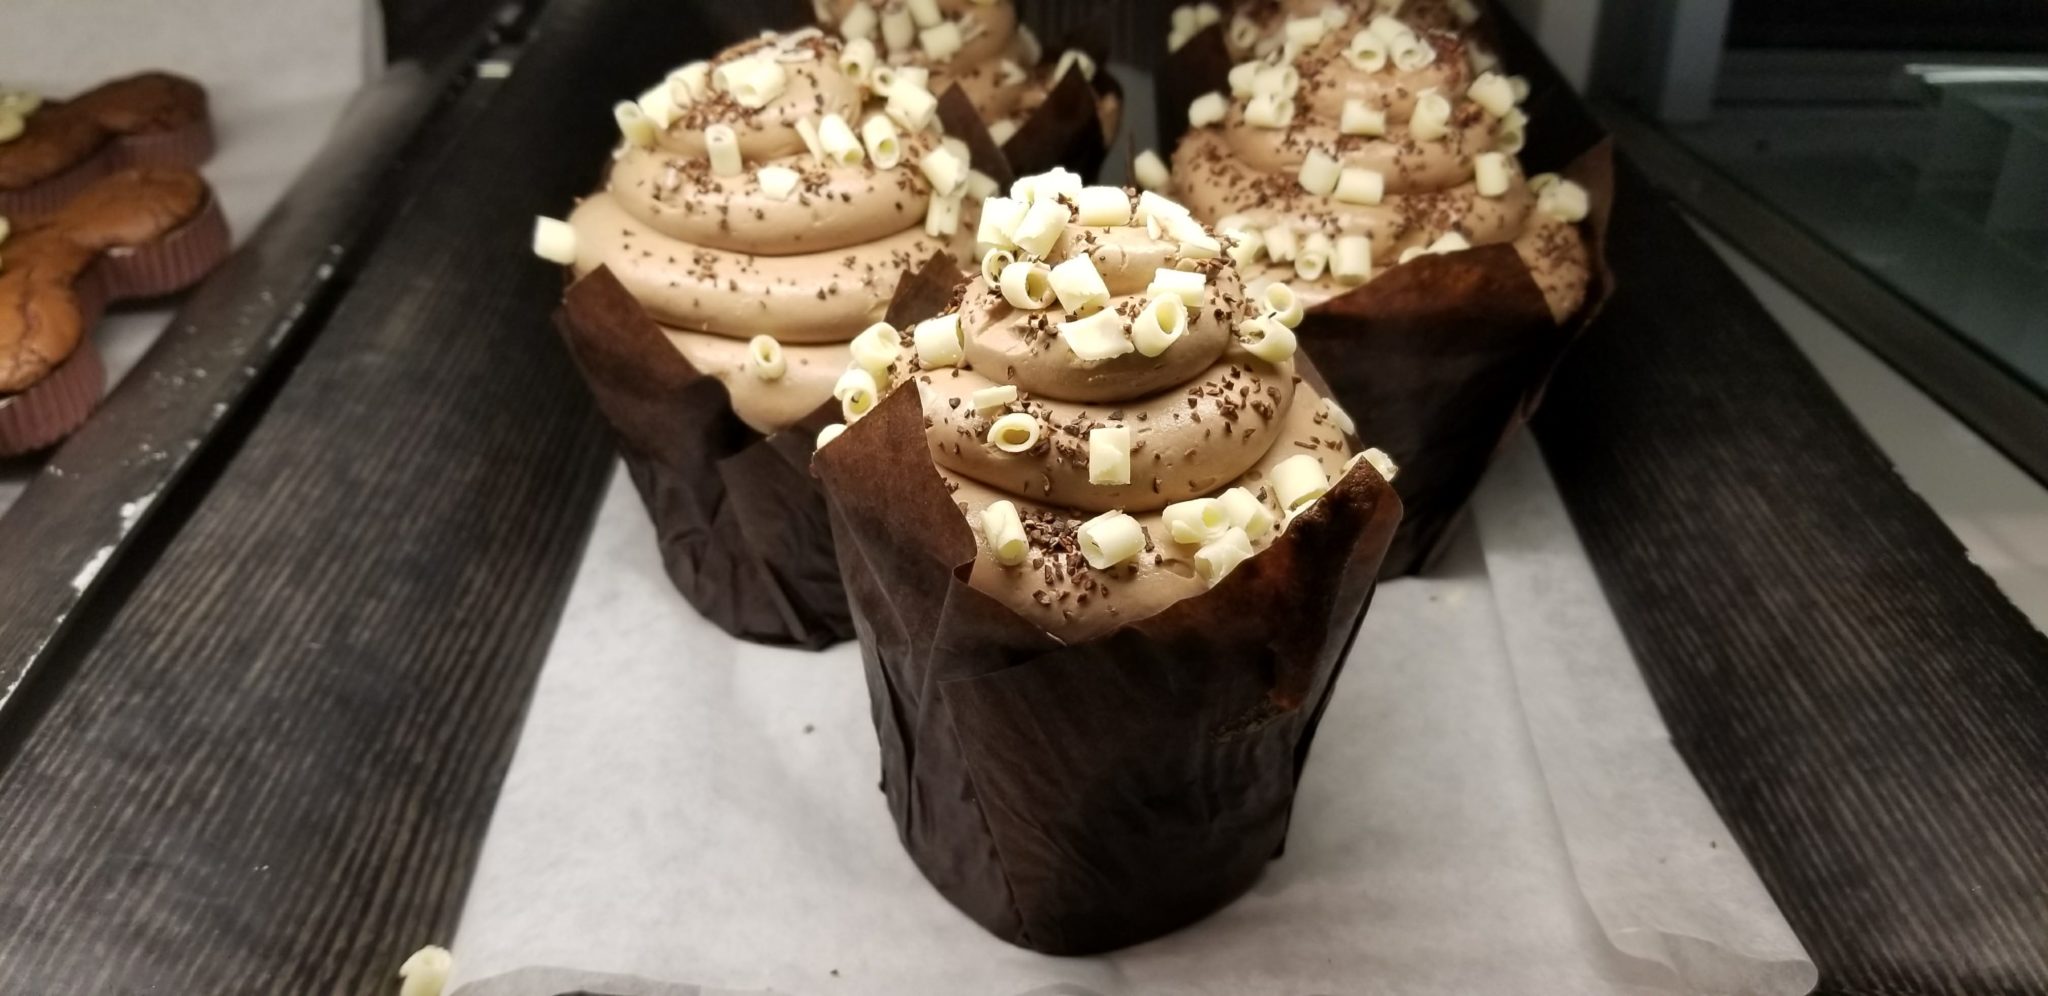 You’ll Go ‘Nutty’ Over The Nutella Cupcake at Roaring Forks in Disney World!